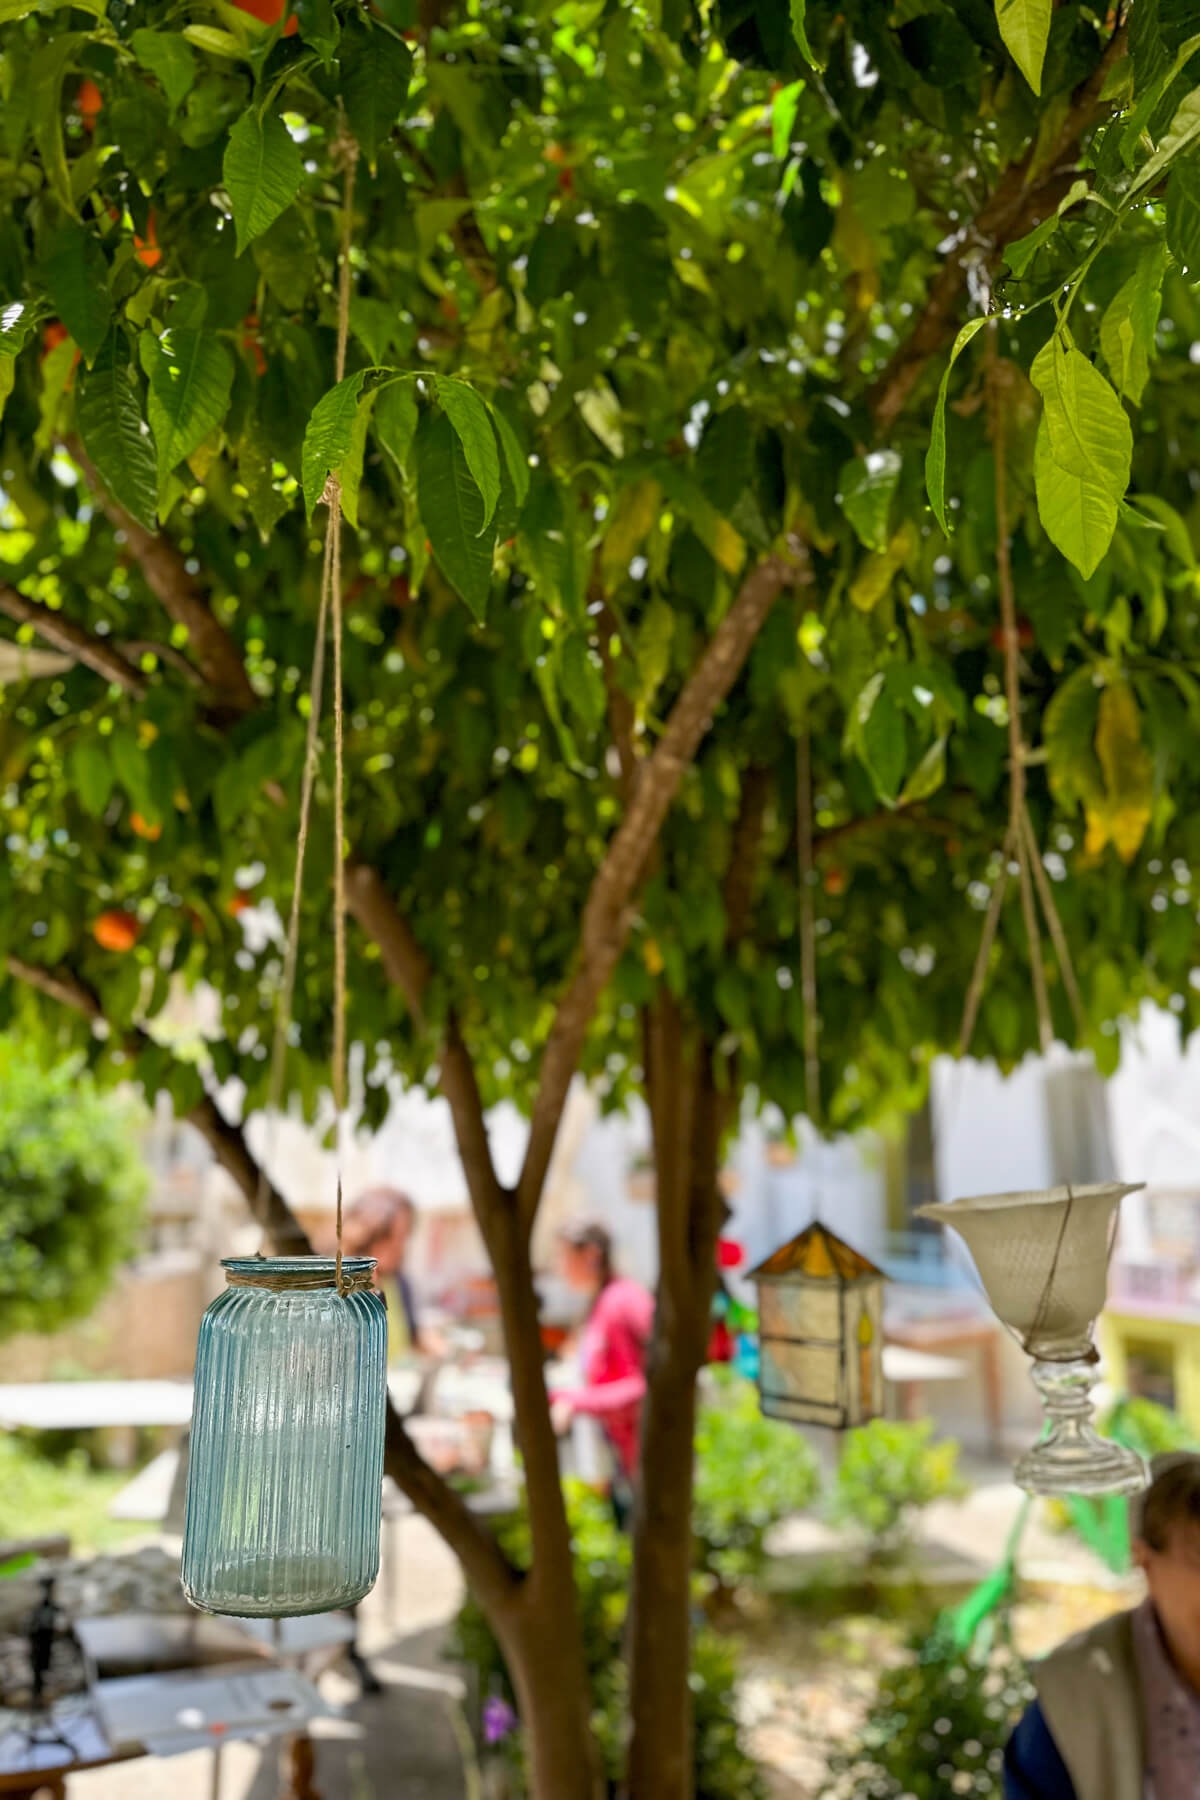 Glass jars and other items hanging down out of the orange tree in the mosaics yard